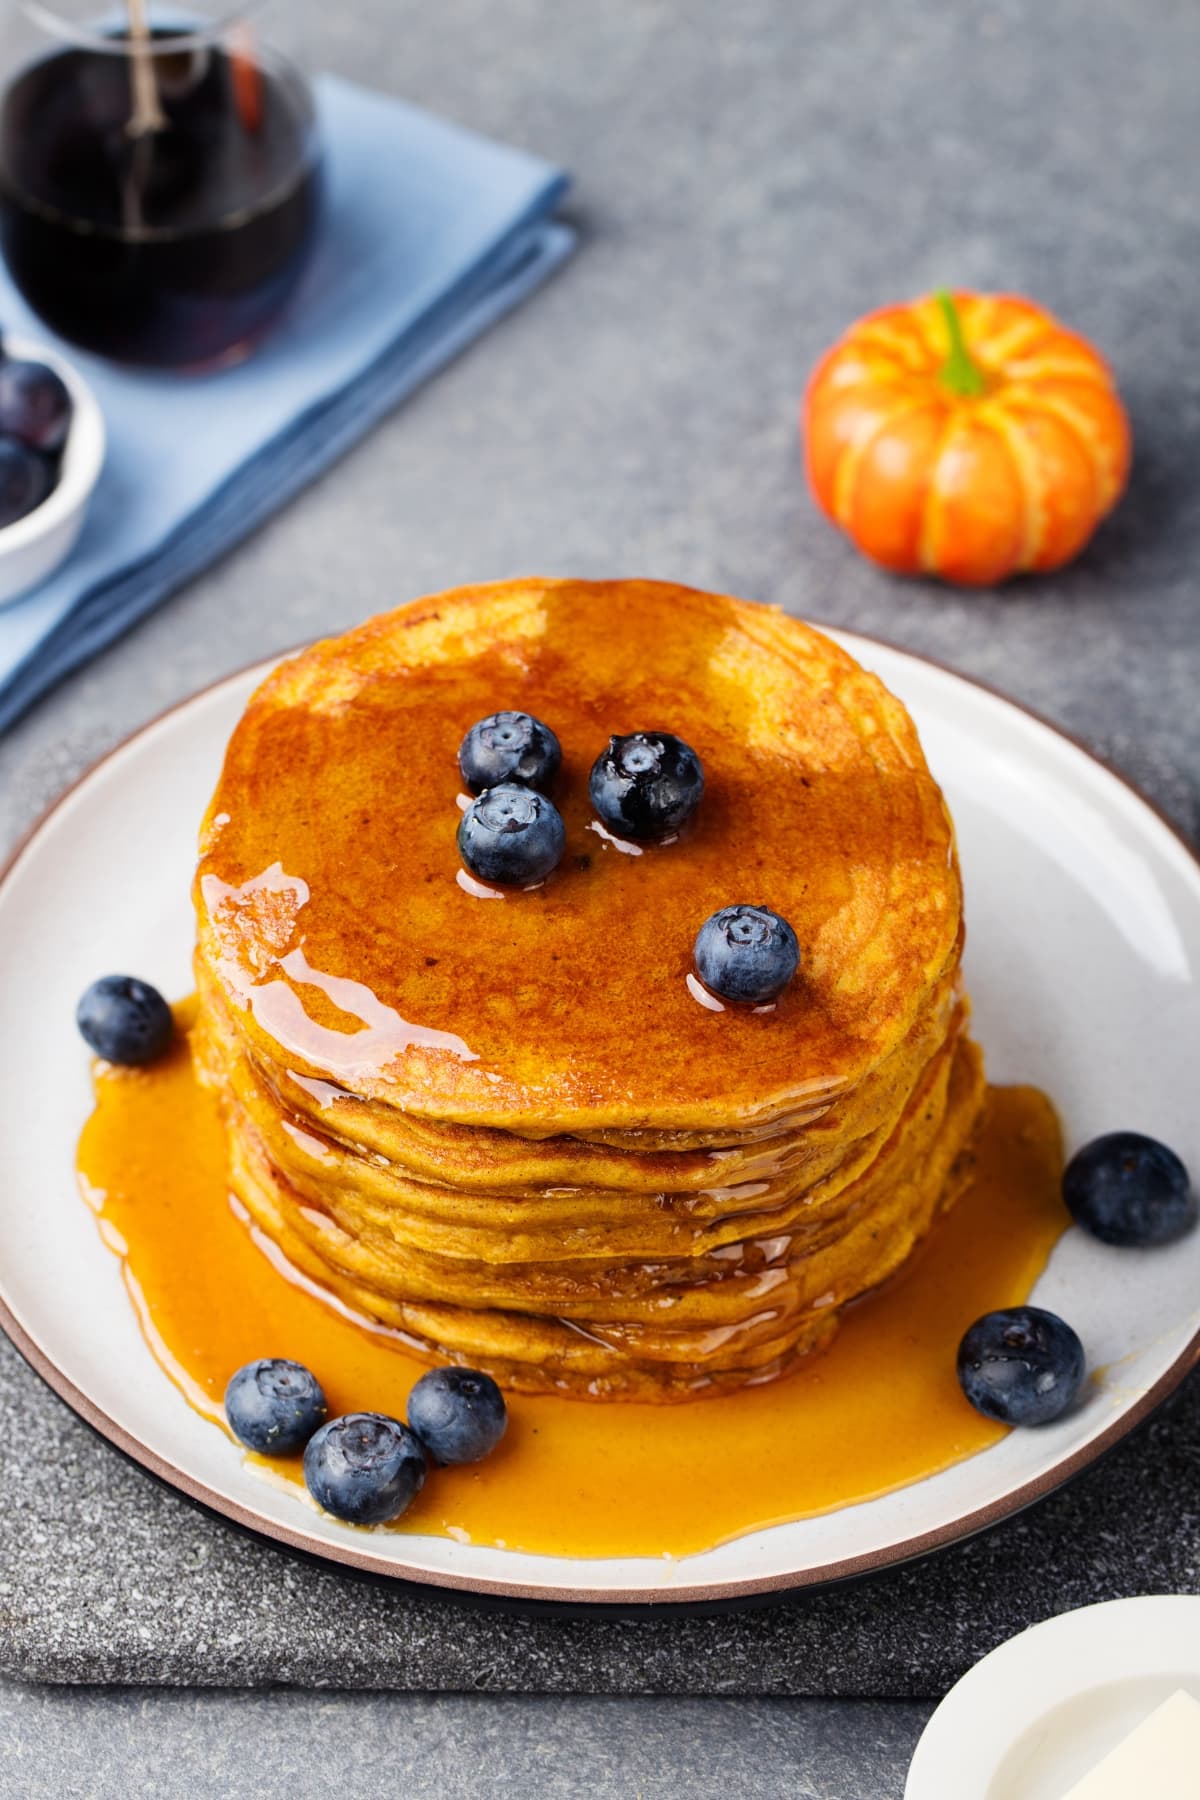 Soft and fluffy pumpkin pancakes with blueberries and syrup